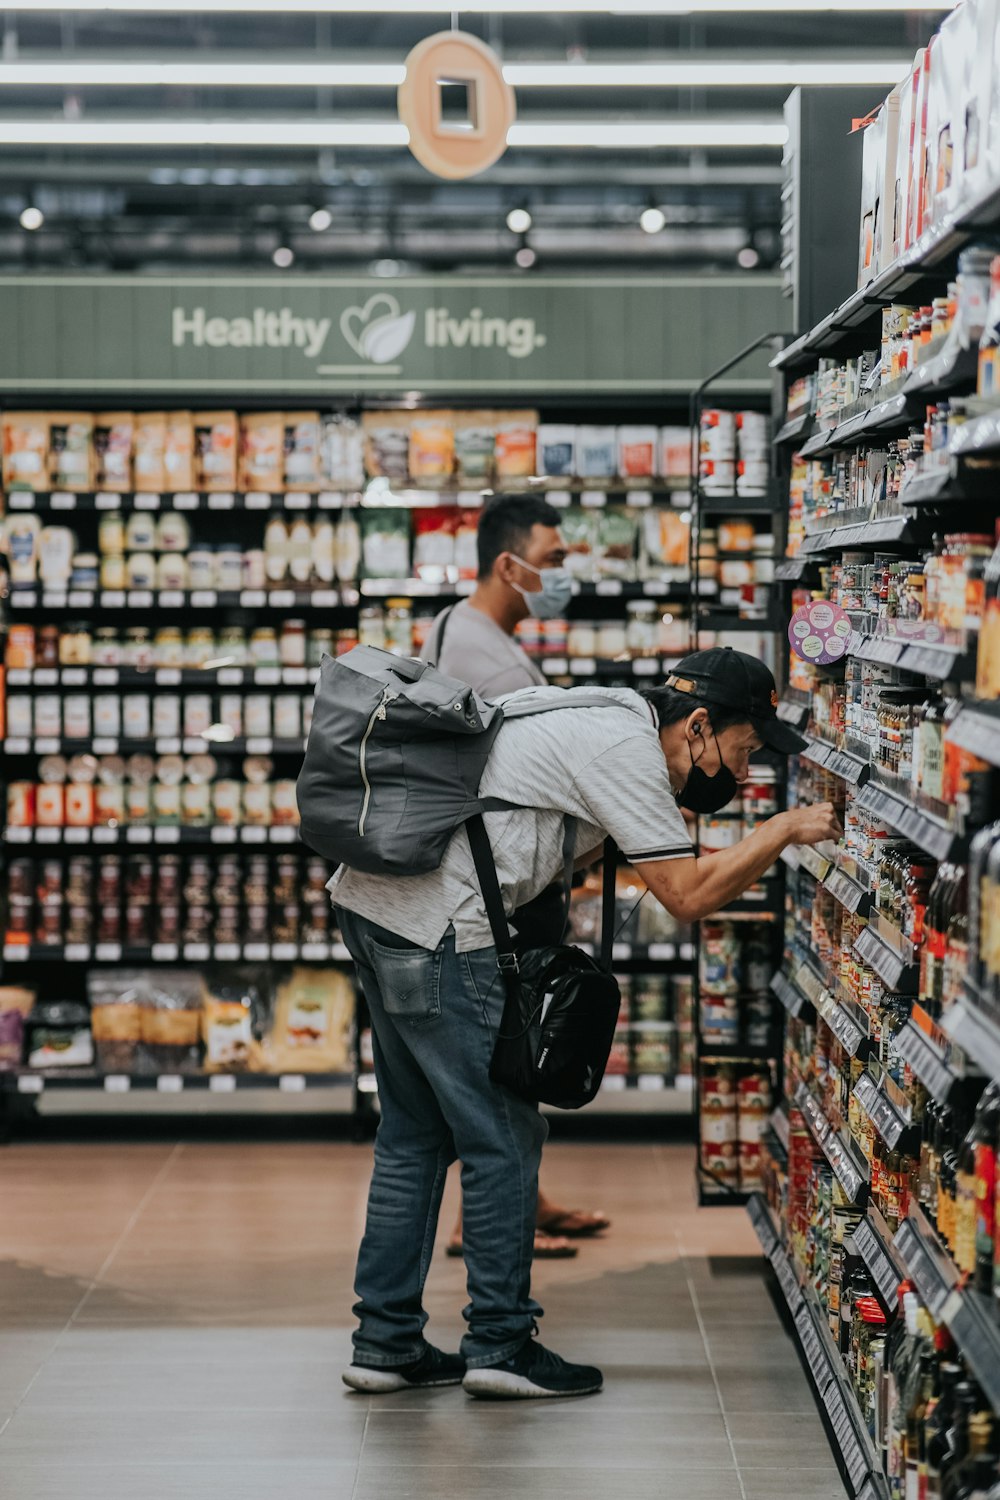 Supermercado Pictures  Download Free Images on Unsplash